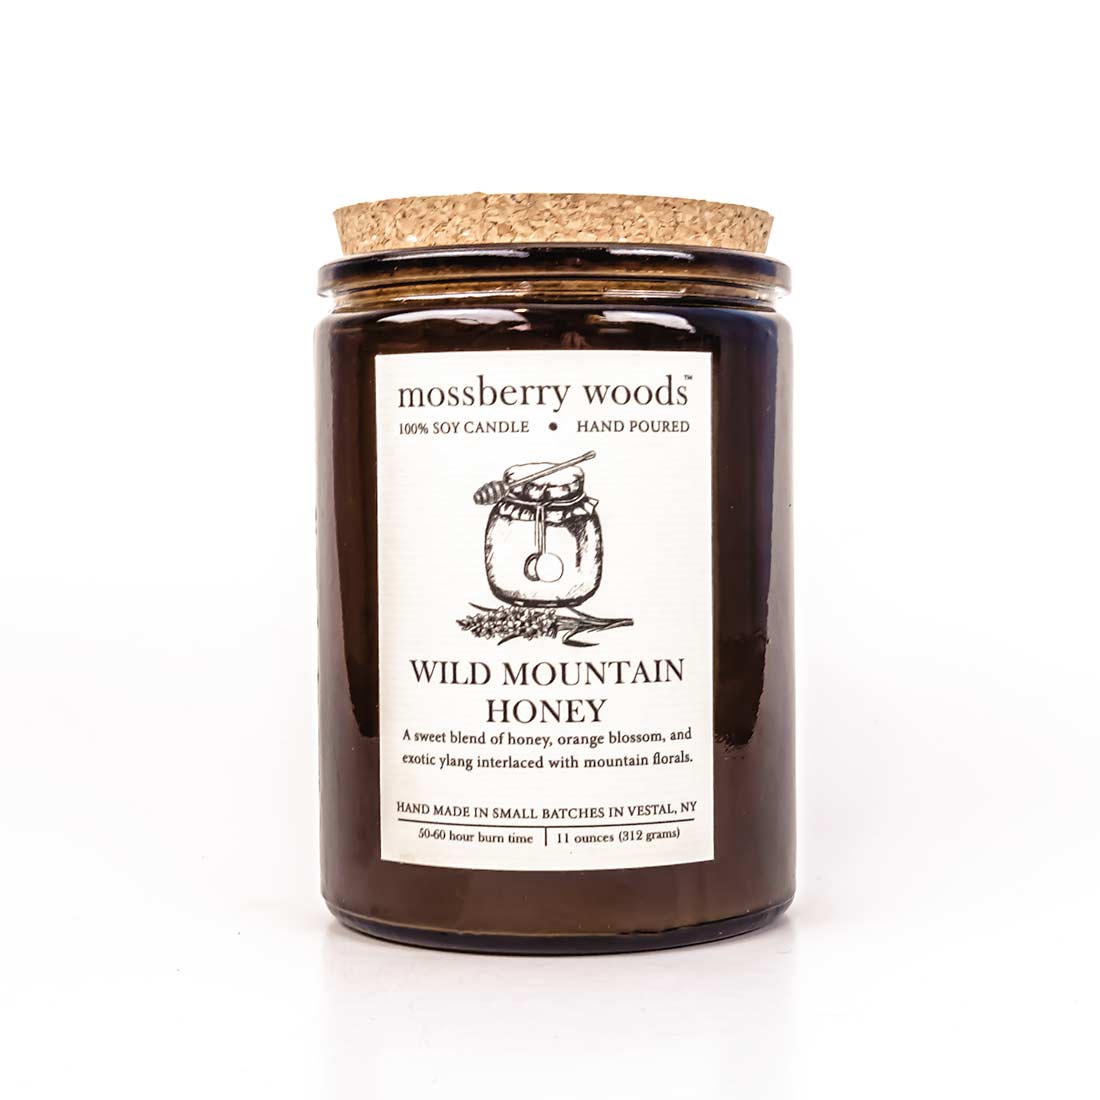 Wild Mountain Honey in rustic amber jar with a cork lid on a white background